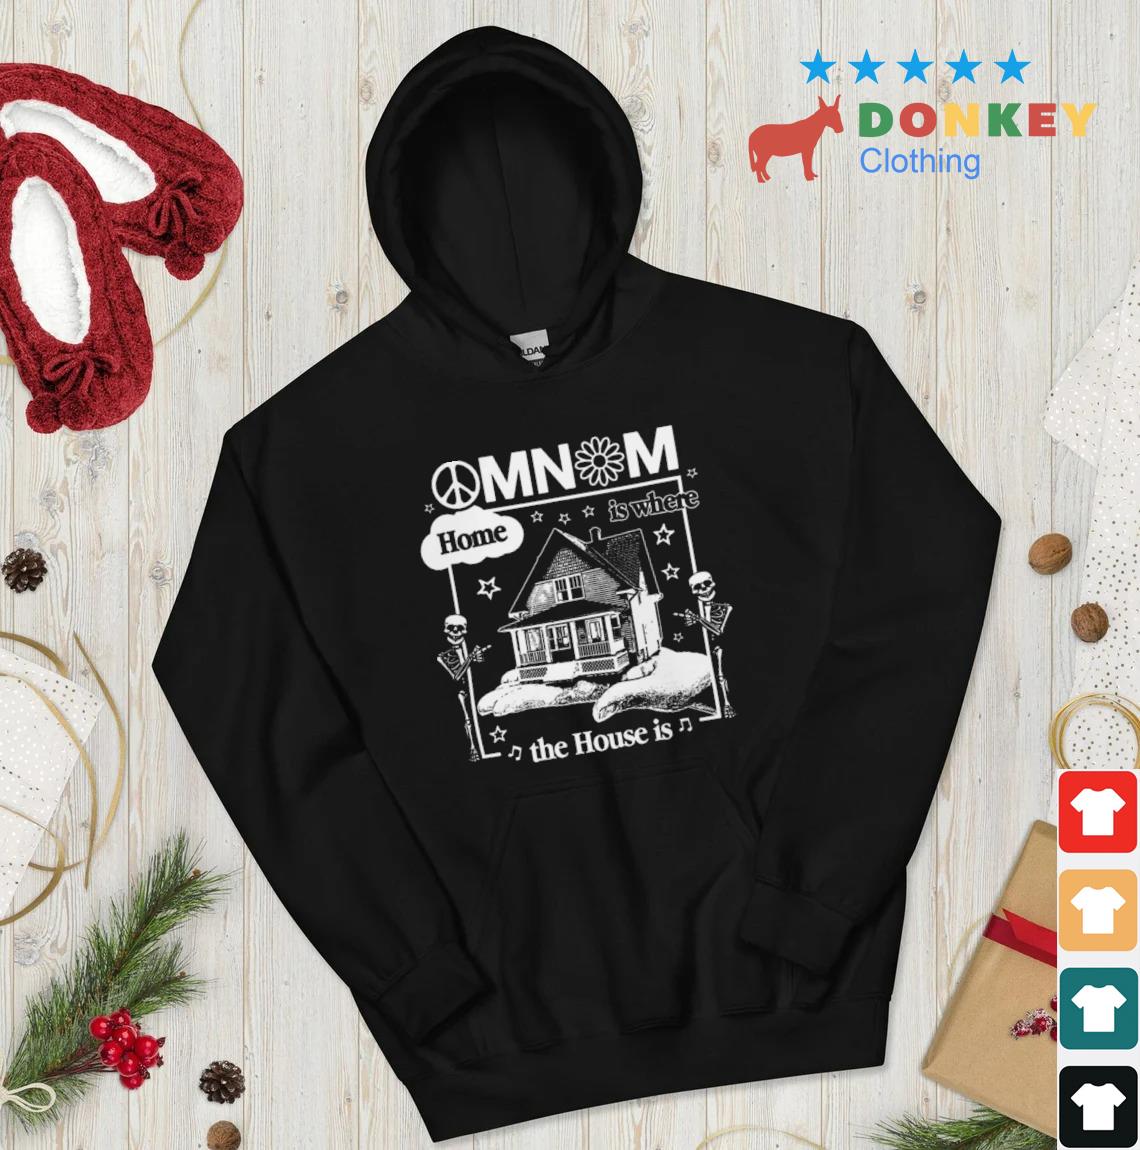 Omnom Home Is Where The House Is Shirt hoodie don den